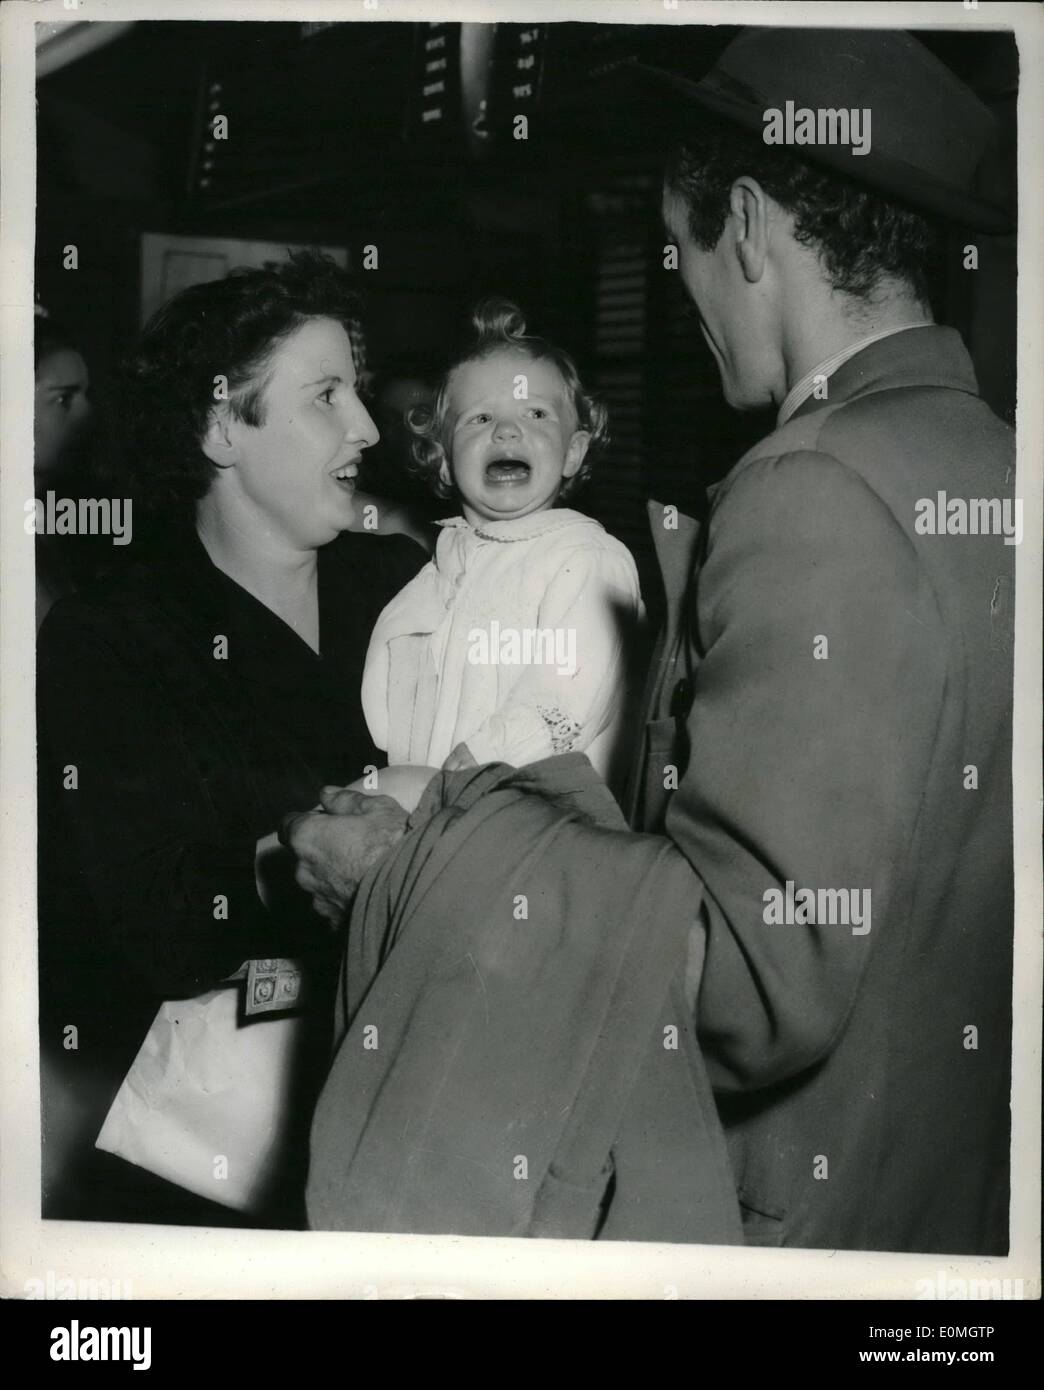 May 05, 1955 - MOTHER FLIES TO AMERICA TO GIVE HER BABY AWAY a 17 month old baby girl flew with her mother from London Airport last night to be adopted by an American couple she calls Mummy and Daddy. The baby is Joyce McDonagh,youngest of the six children of Thomas and Lily McDonagh,from Newton Le Willows, Lanca.Waiting for them at Holly Hill,South Carolina are Sergeant George Viansky of the US Air Force and his wife.The story started when Sergeant Viansky was stationed in Britain near the McDonaghs Stock Photo